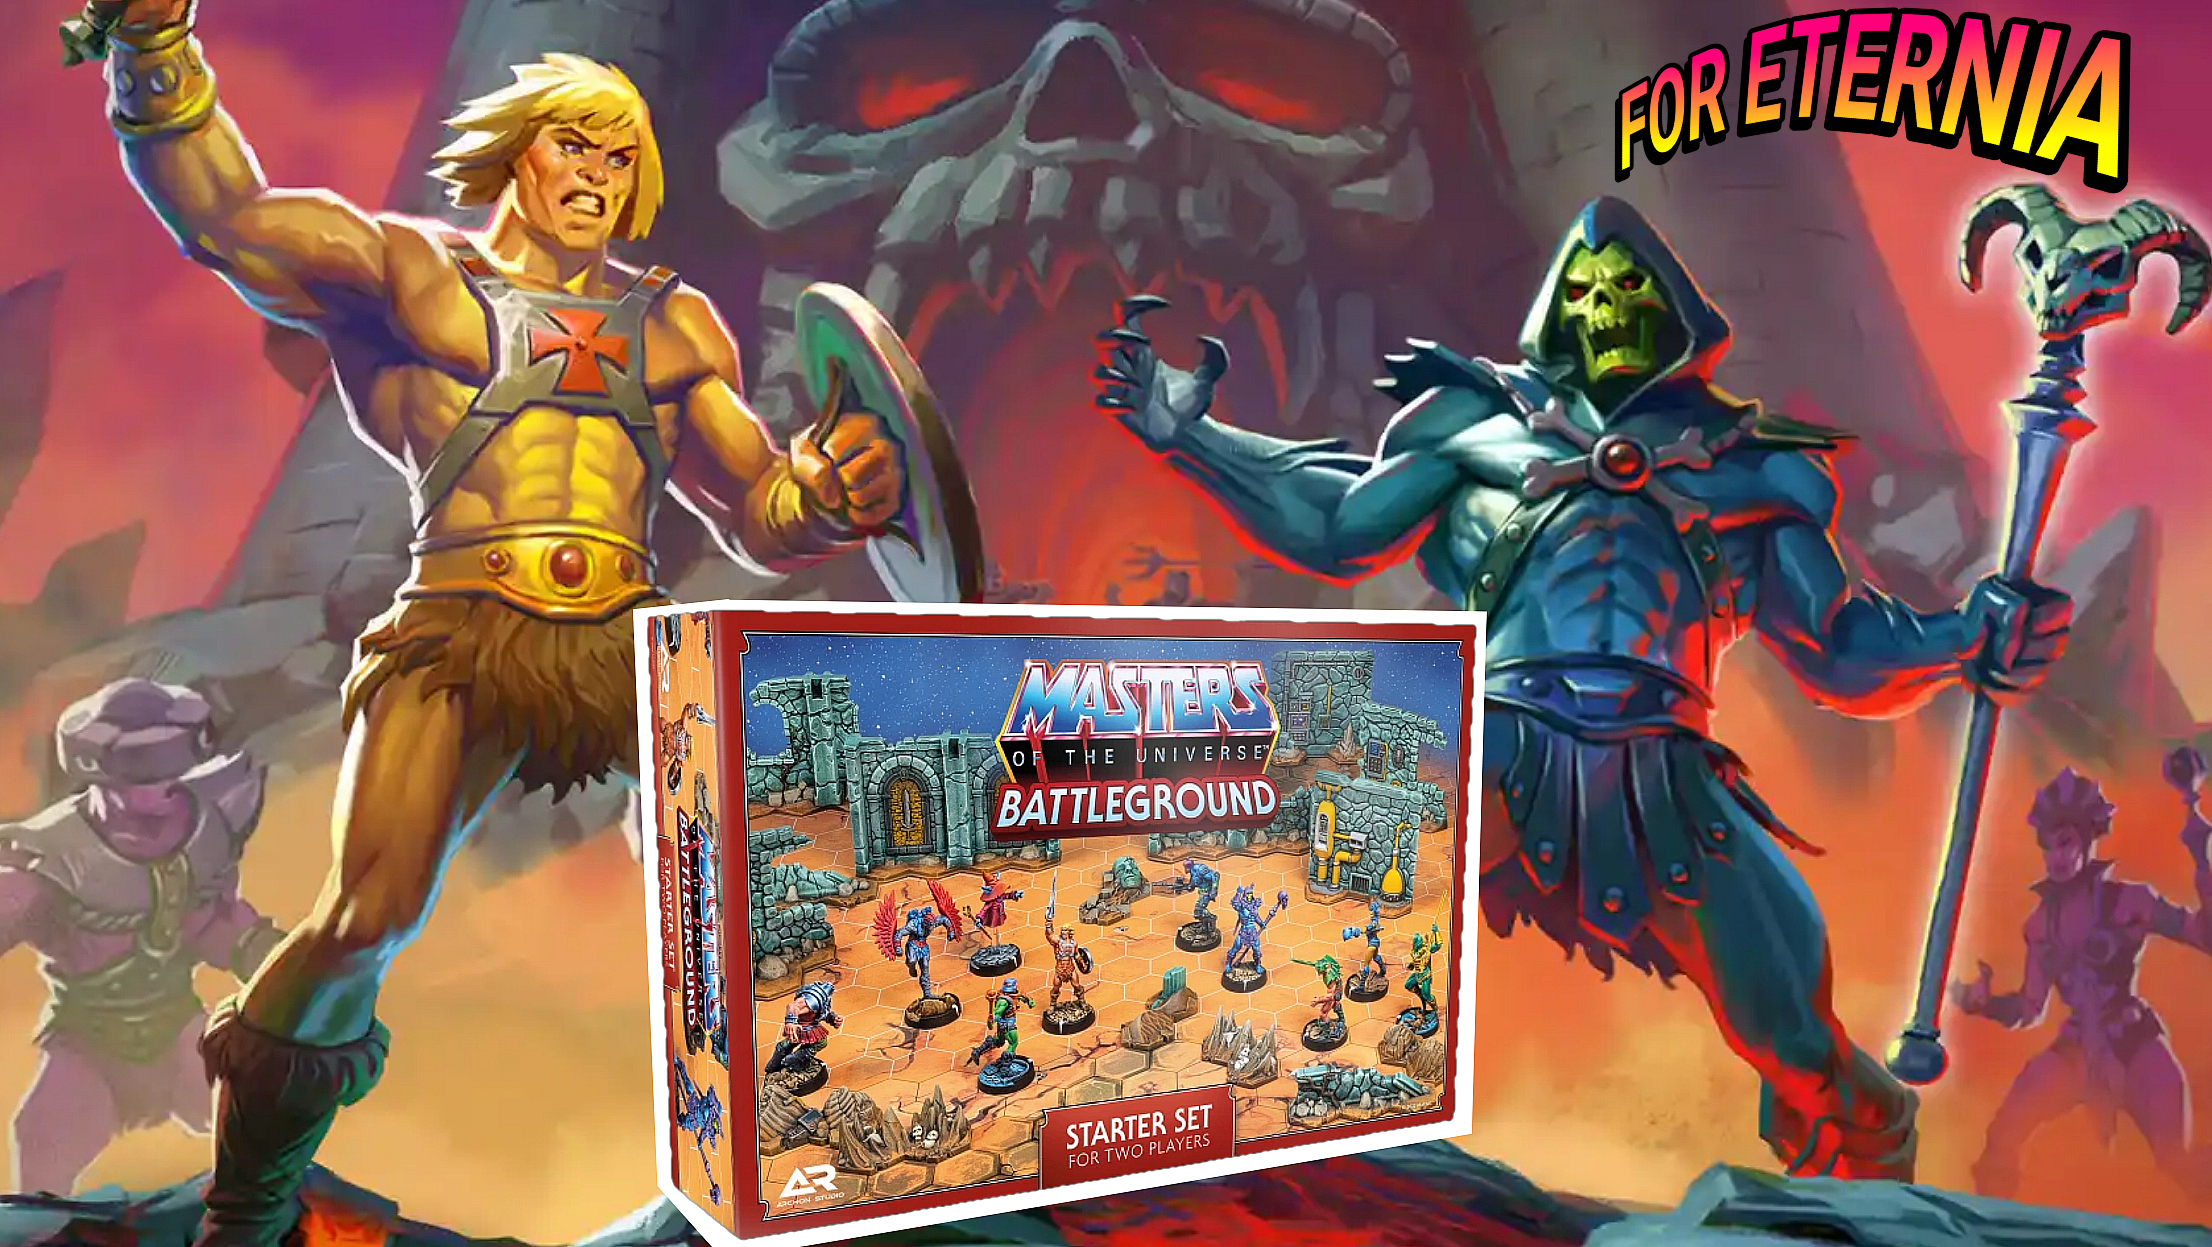 ”Masters of the Universe: Battleground” game is coming to Retail in the U.S.